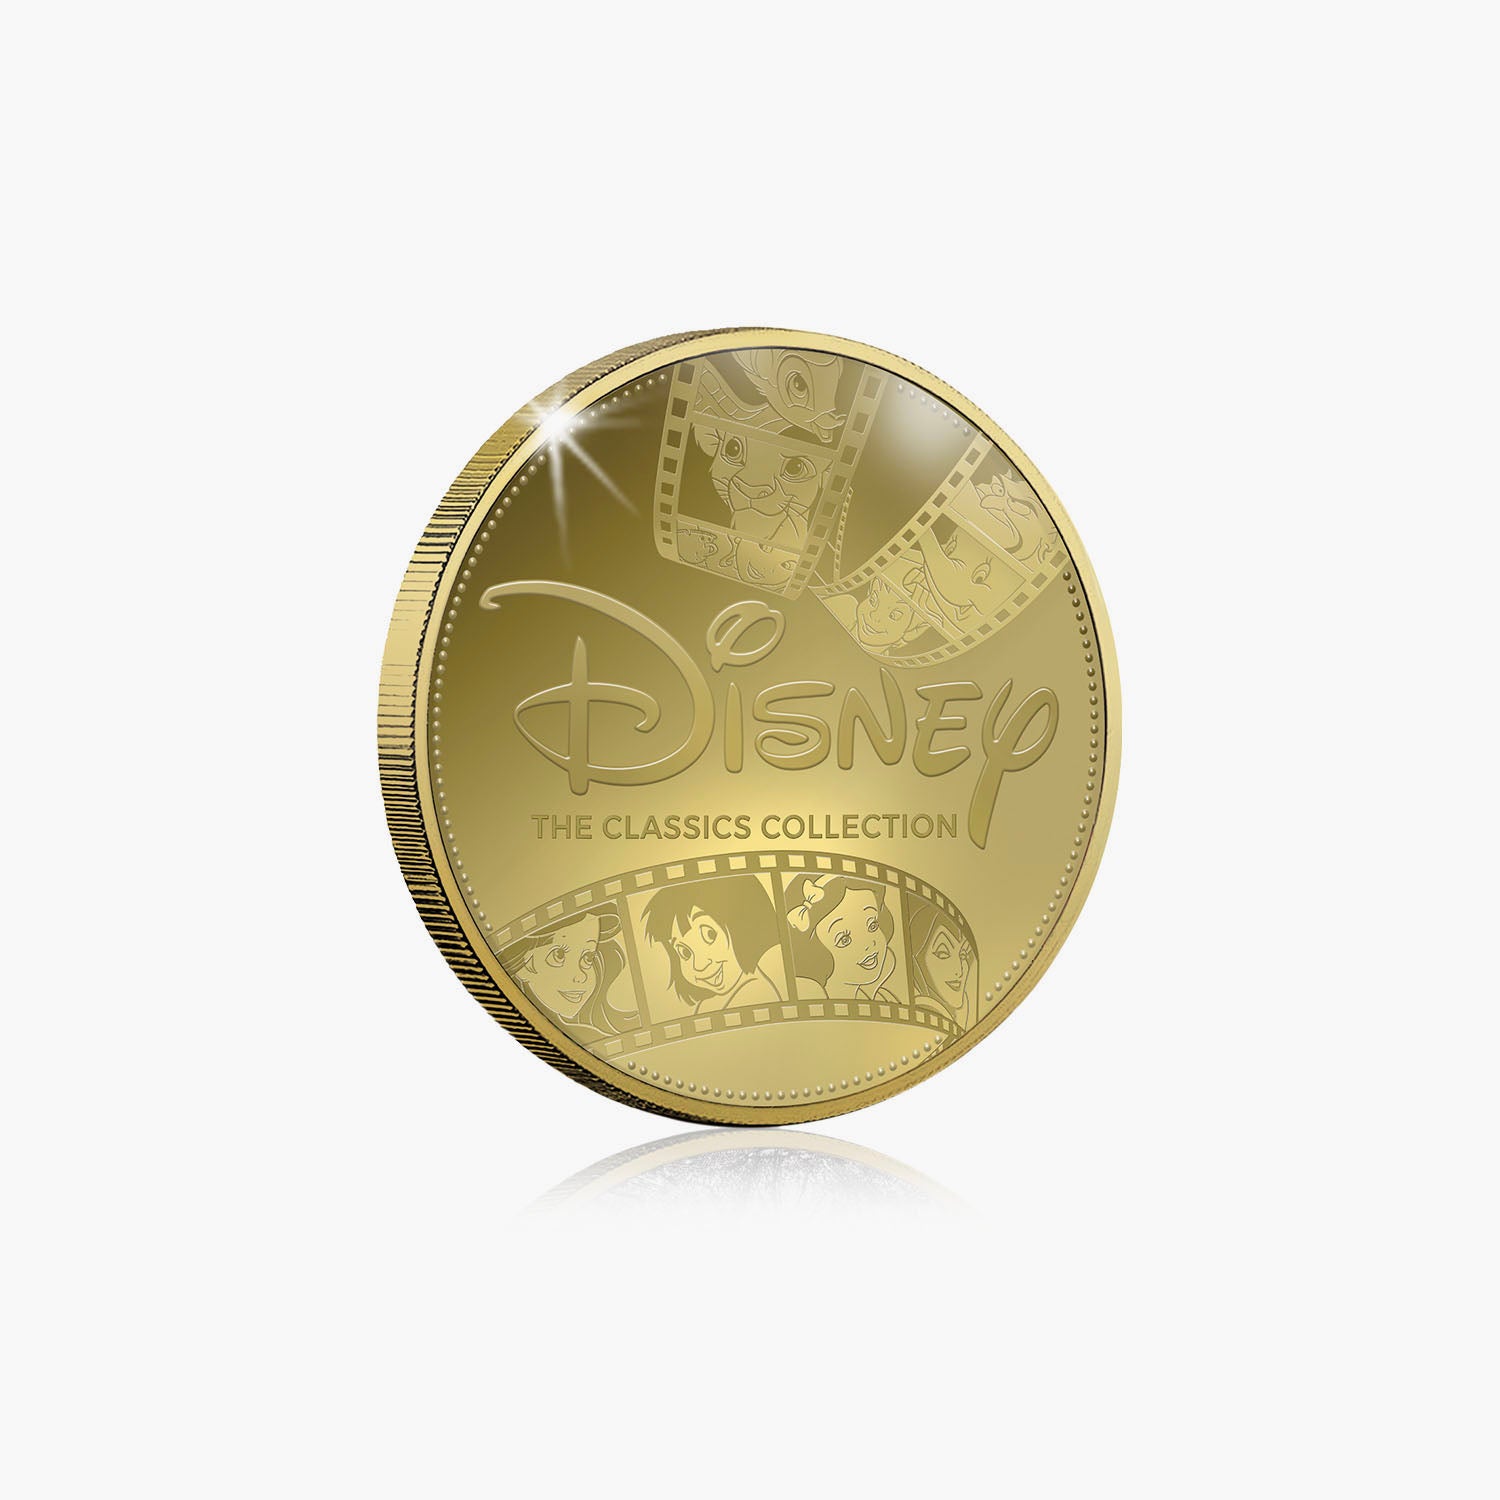 Aristocats Gold-Plated Commemorative